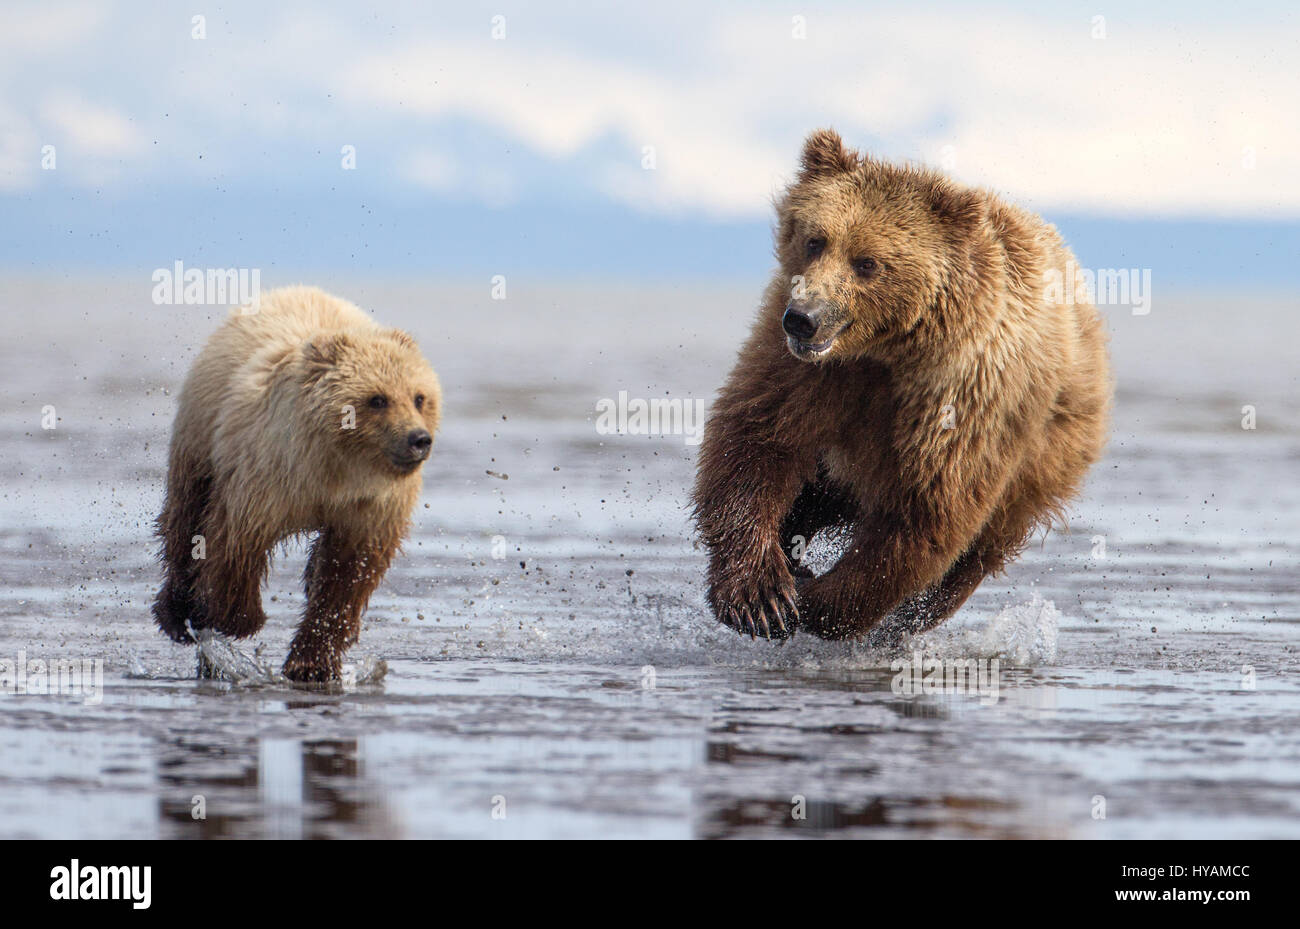 LAKE CLARKE, ALASKA: A BEARHUG has never looked so high-speed as this shot  of a 400-pound mother bear running up to its fearless baby so the pair can  lovingly embrace. Other heart-warming